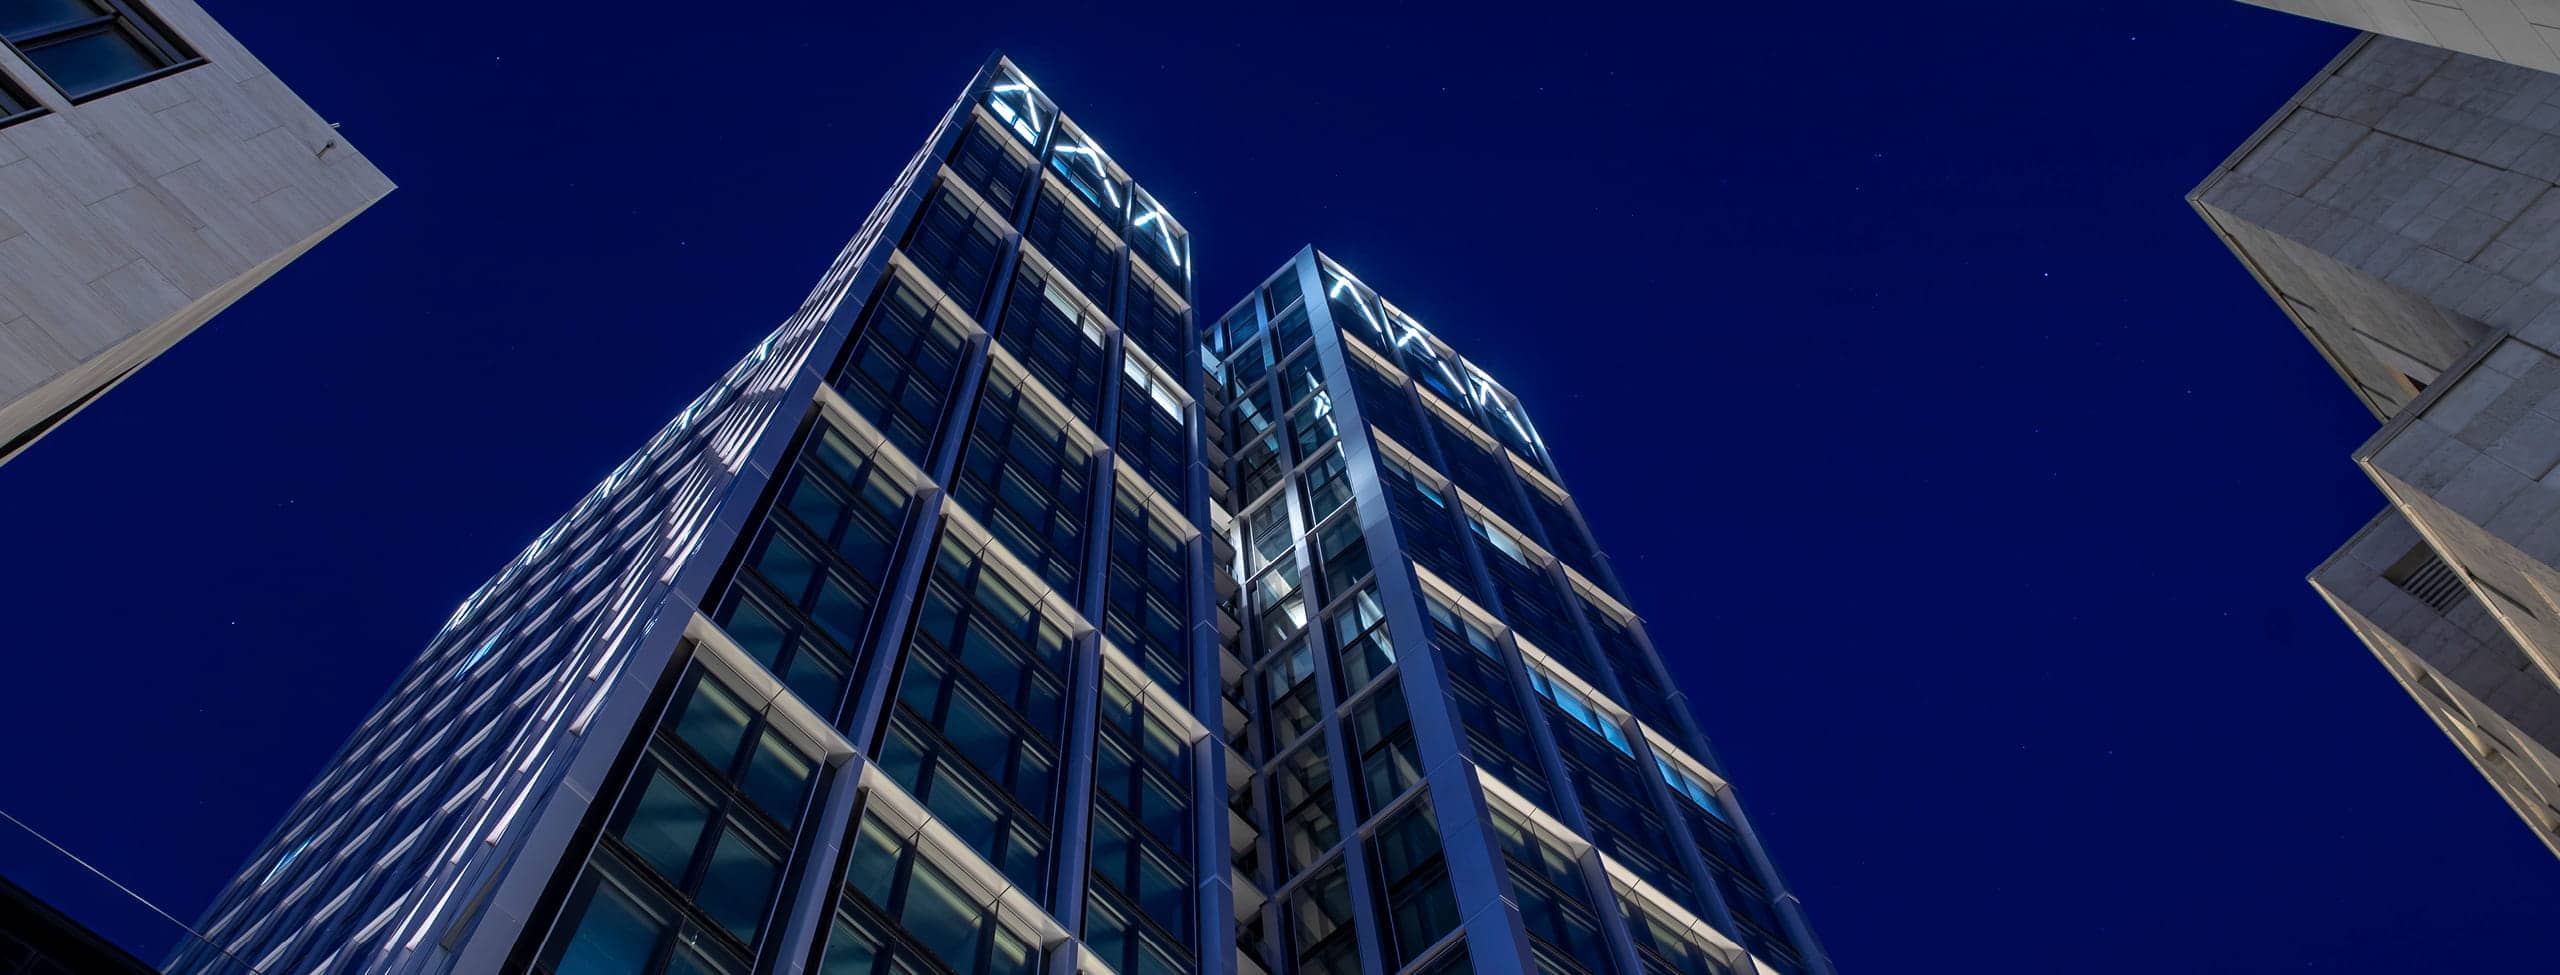 Highrise building at night